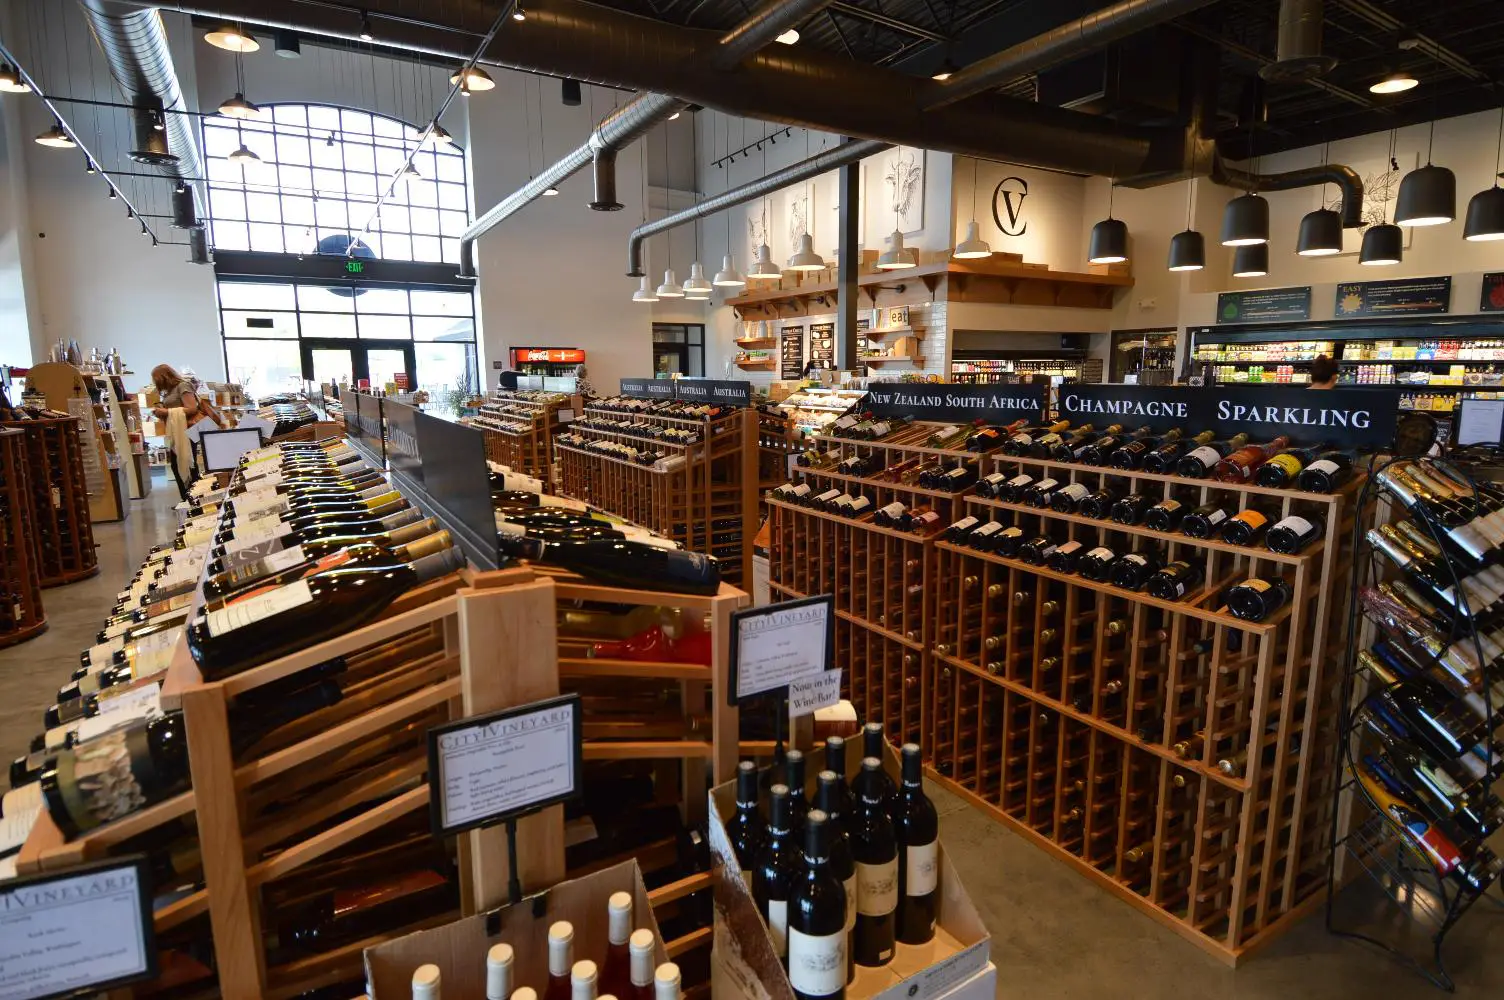 Commercial Wine Storage for Better Wine Management and Inventory Built in a Wine Store in Montana